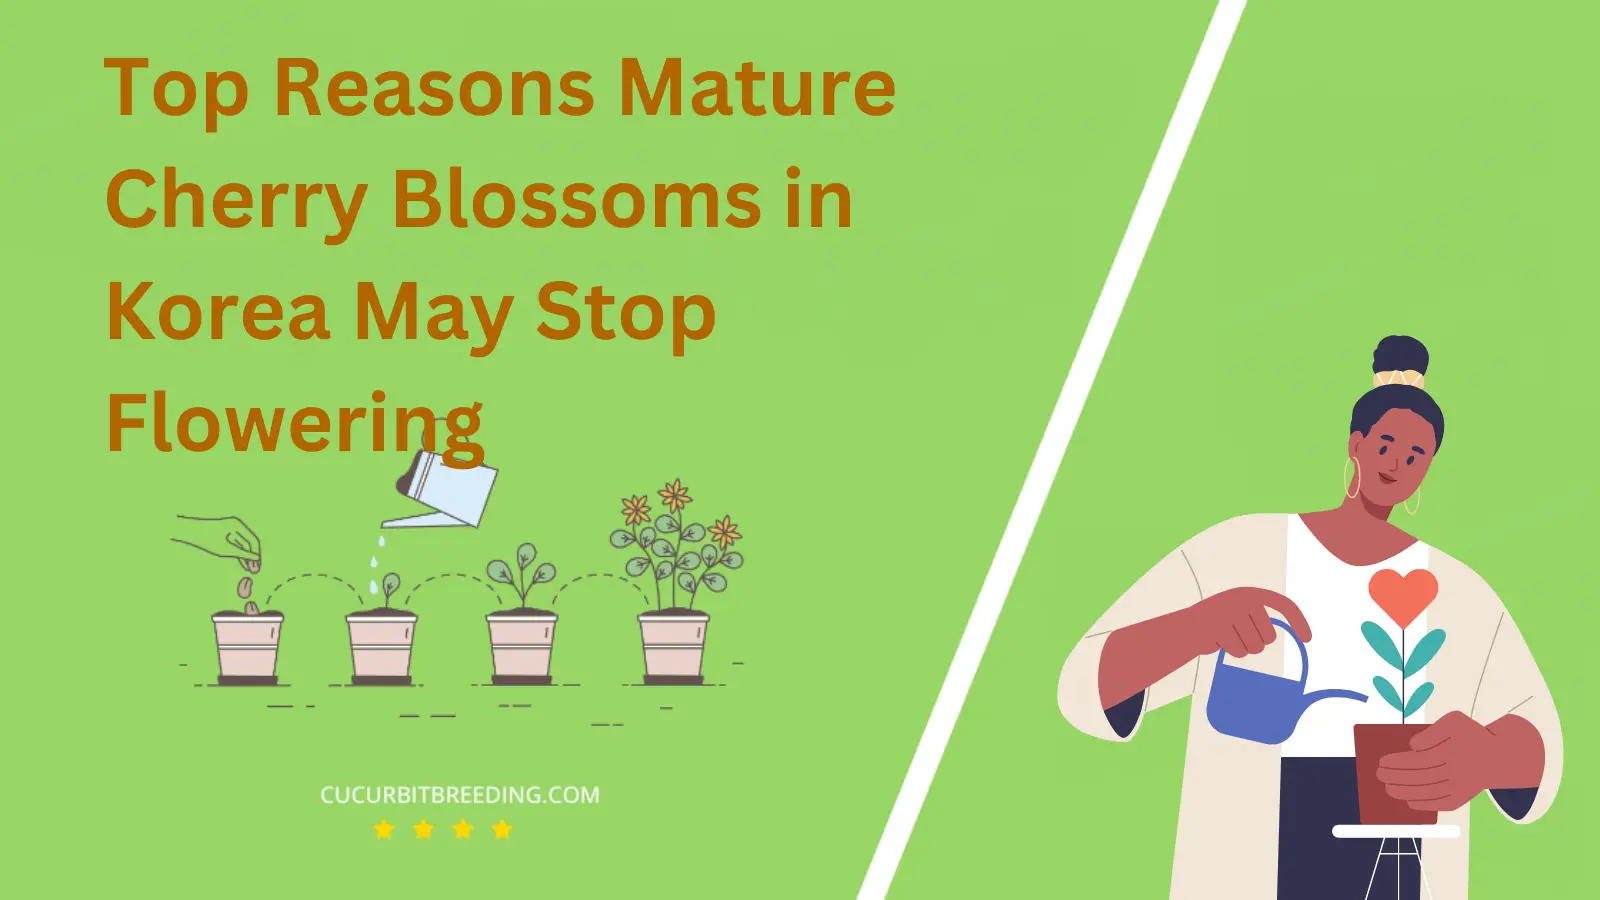 Top Reasons Mature Cherry Blossoms in Korea May Stop Flowering